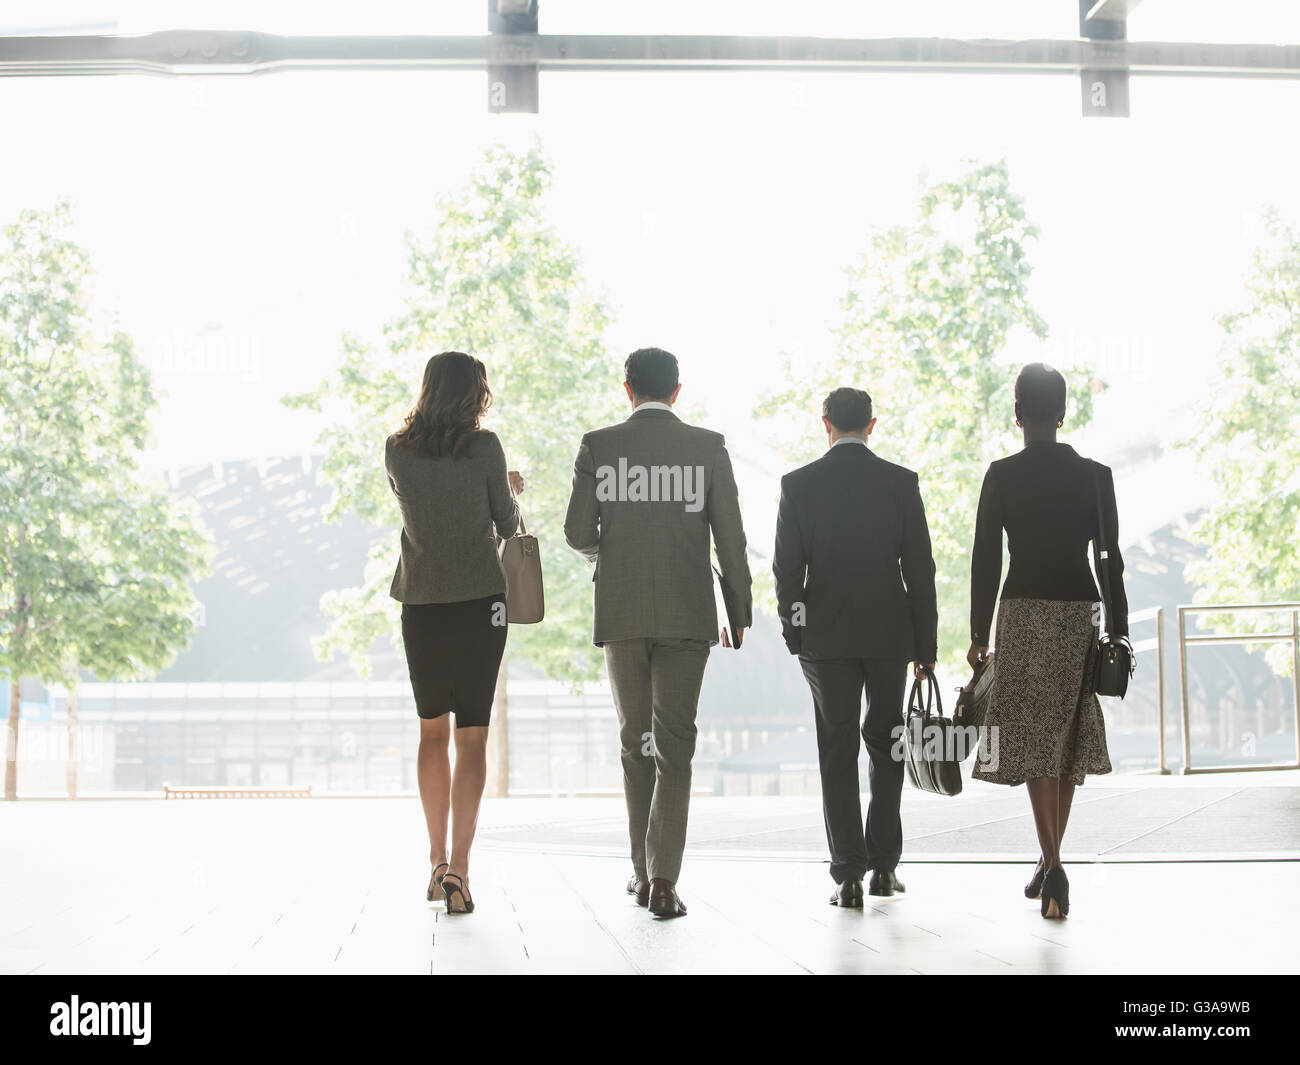 Corporate business people walking in a row Stock Photo